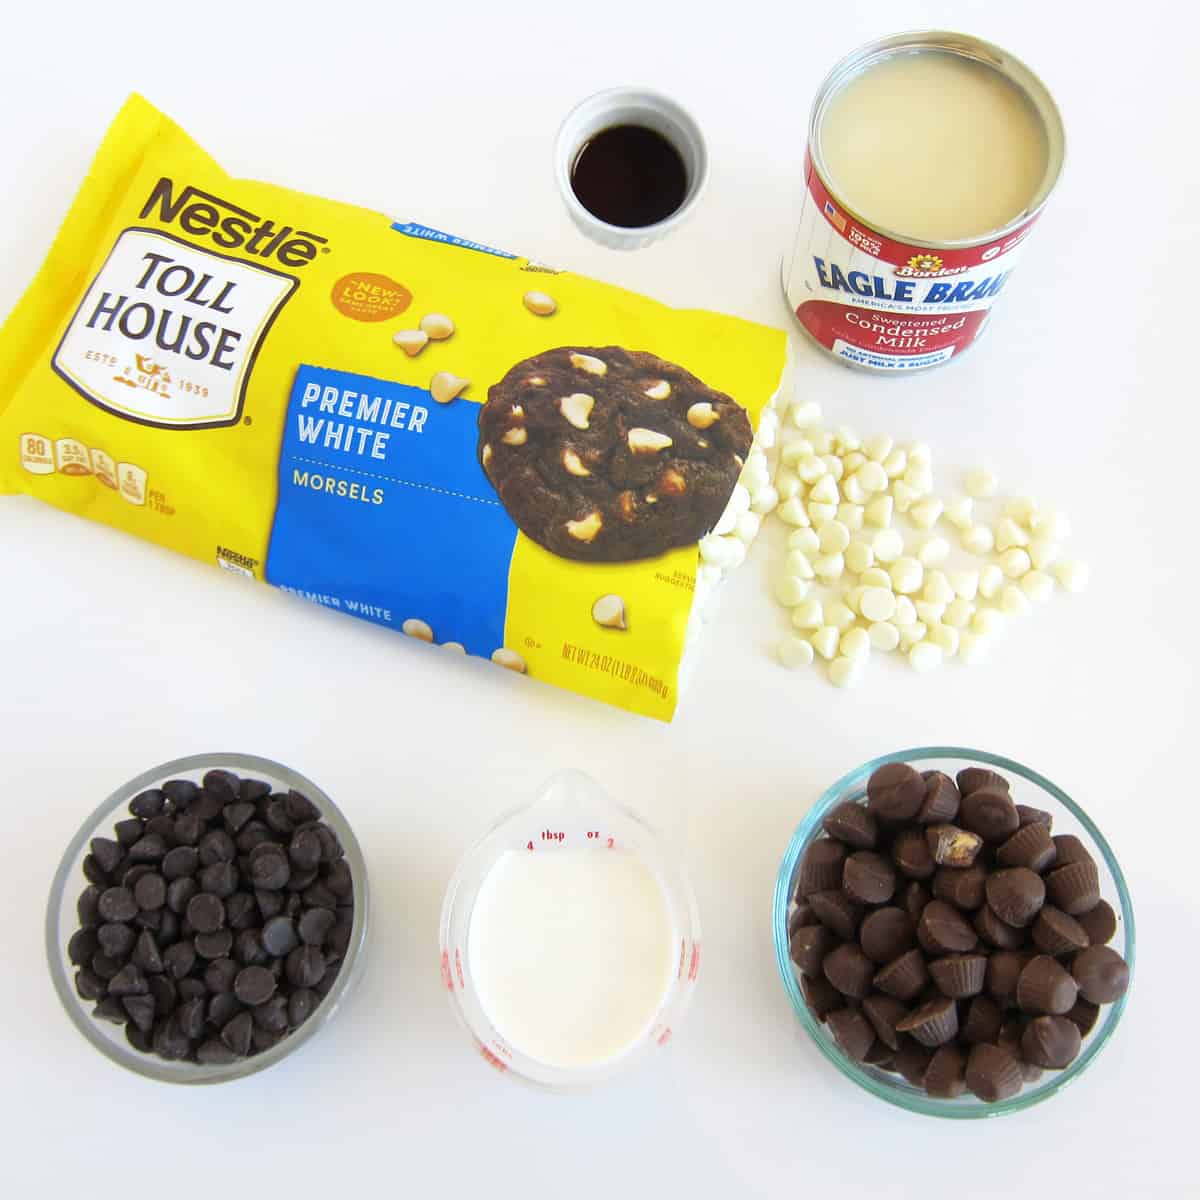 easy fudge recipe ingredients including white chocolate, sweetened condensed milk, vanilla, chocolate, and peanut butter chips